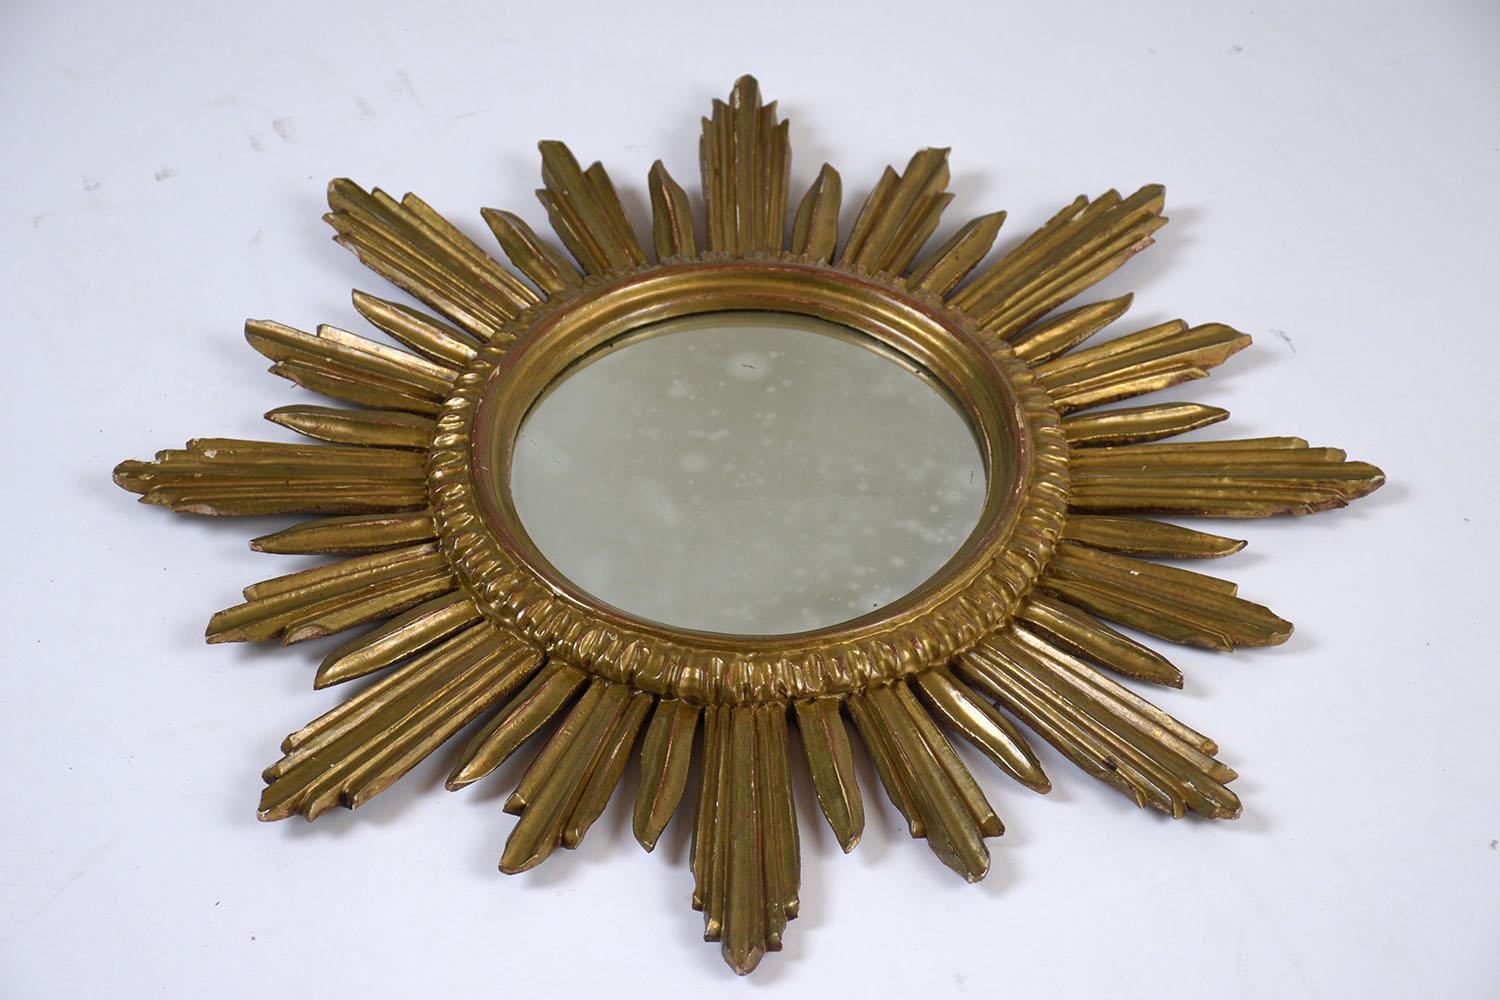 This lovely carved Italian convex sunburst mirror circa 1930s features a giltwood carved frame. The frame has rays encircling the mirror in varying lengths and shapes and original oxidized finish mirror This mirror is stunning and ready to be used